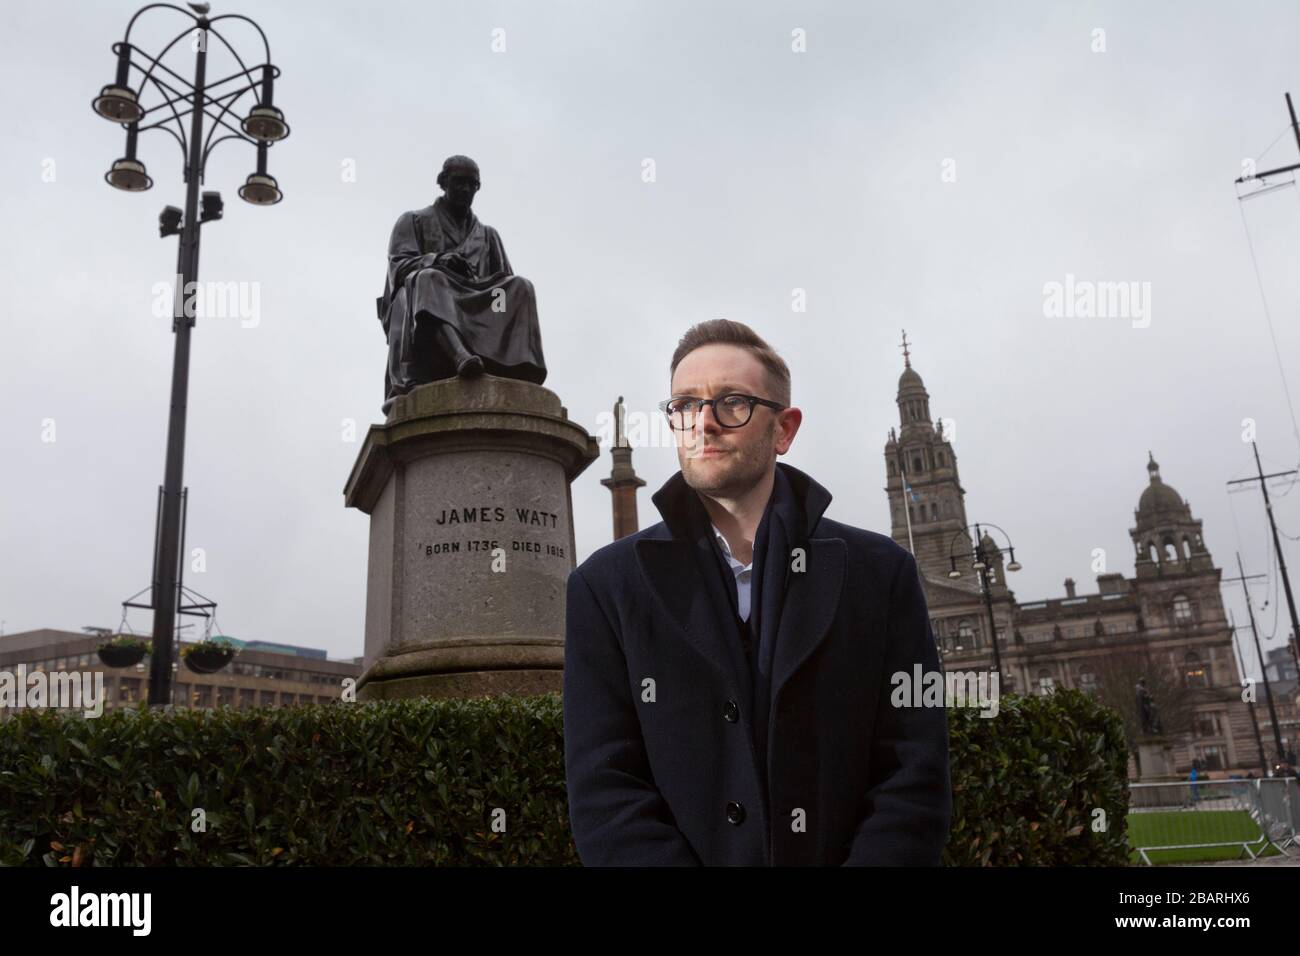 Chris stark Chief Executive des Committee on Climate Change fotografiert auf dem George Square in Glasgow Stockfoto